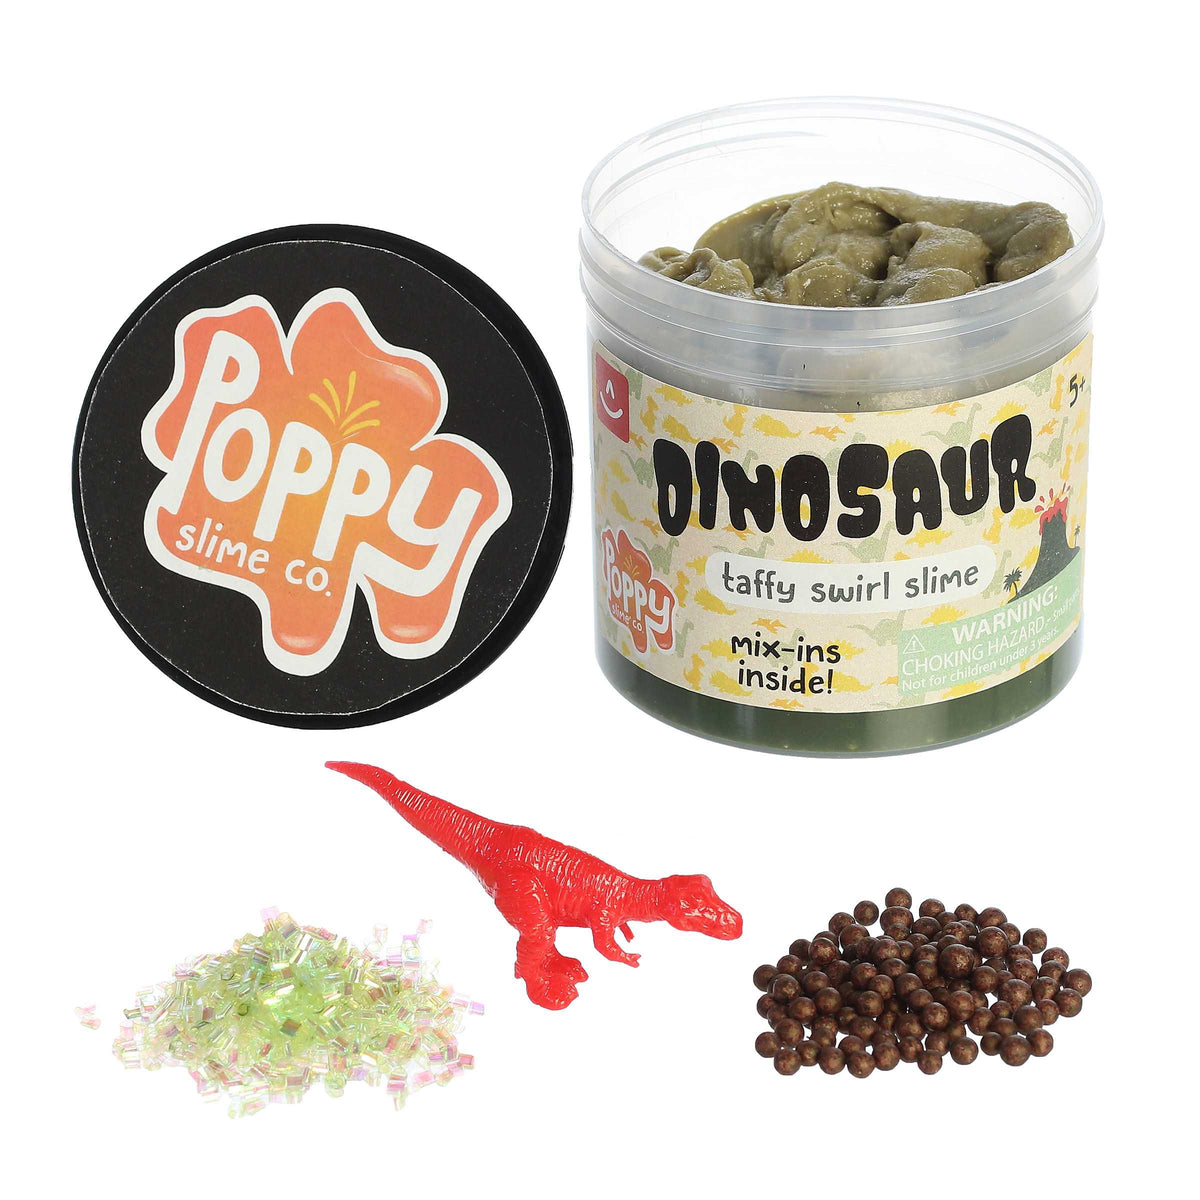 Jurassic Dinosaur Slime, approx. 11.3 oz, featuring a mix of greens and a hidden dinosaur